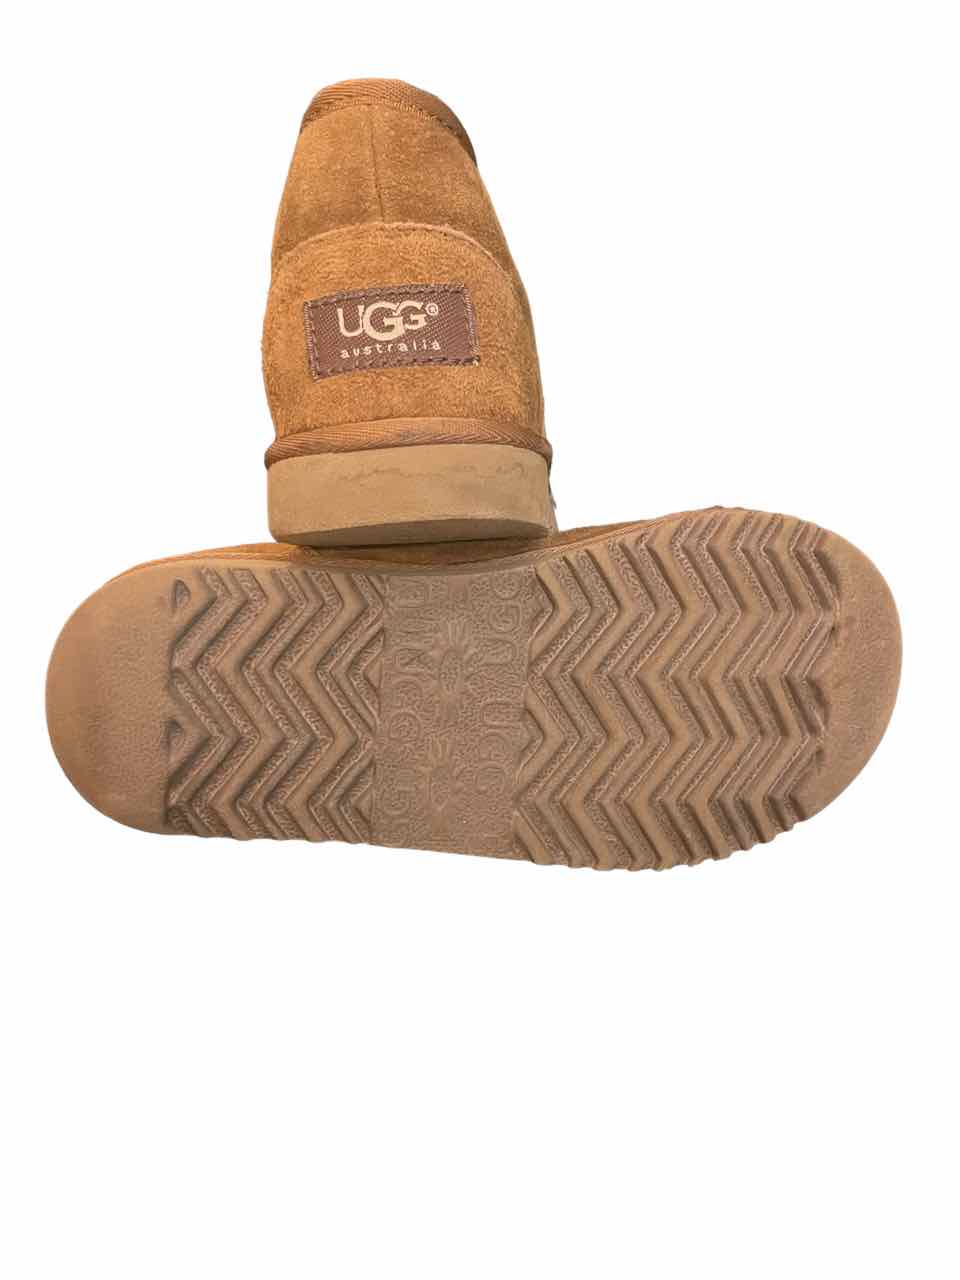 UGG Size 4 Brown Suede Casual Shoes